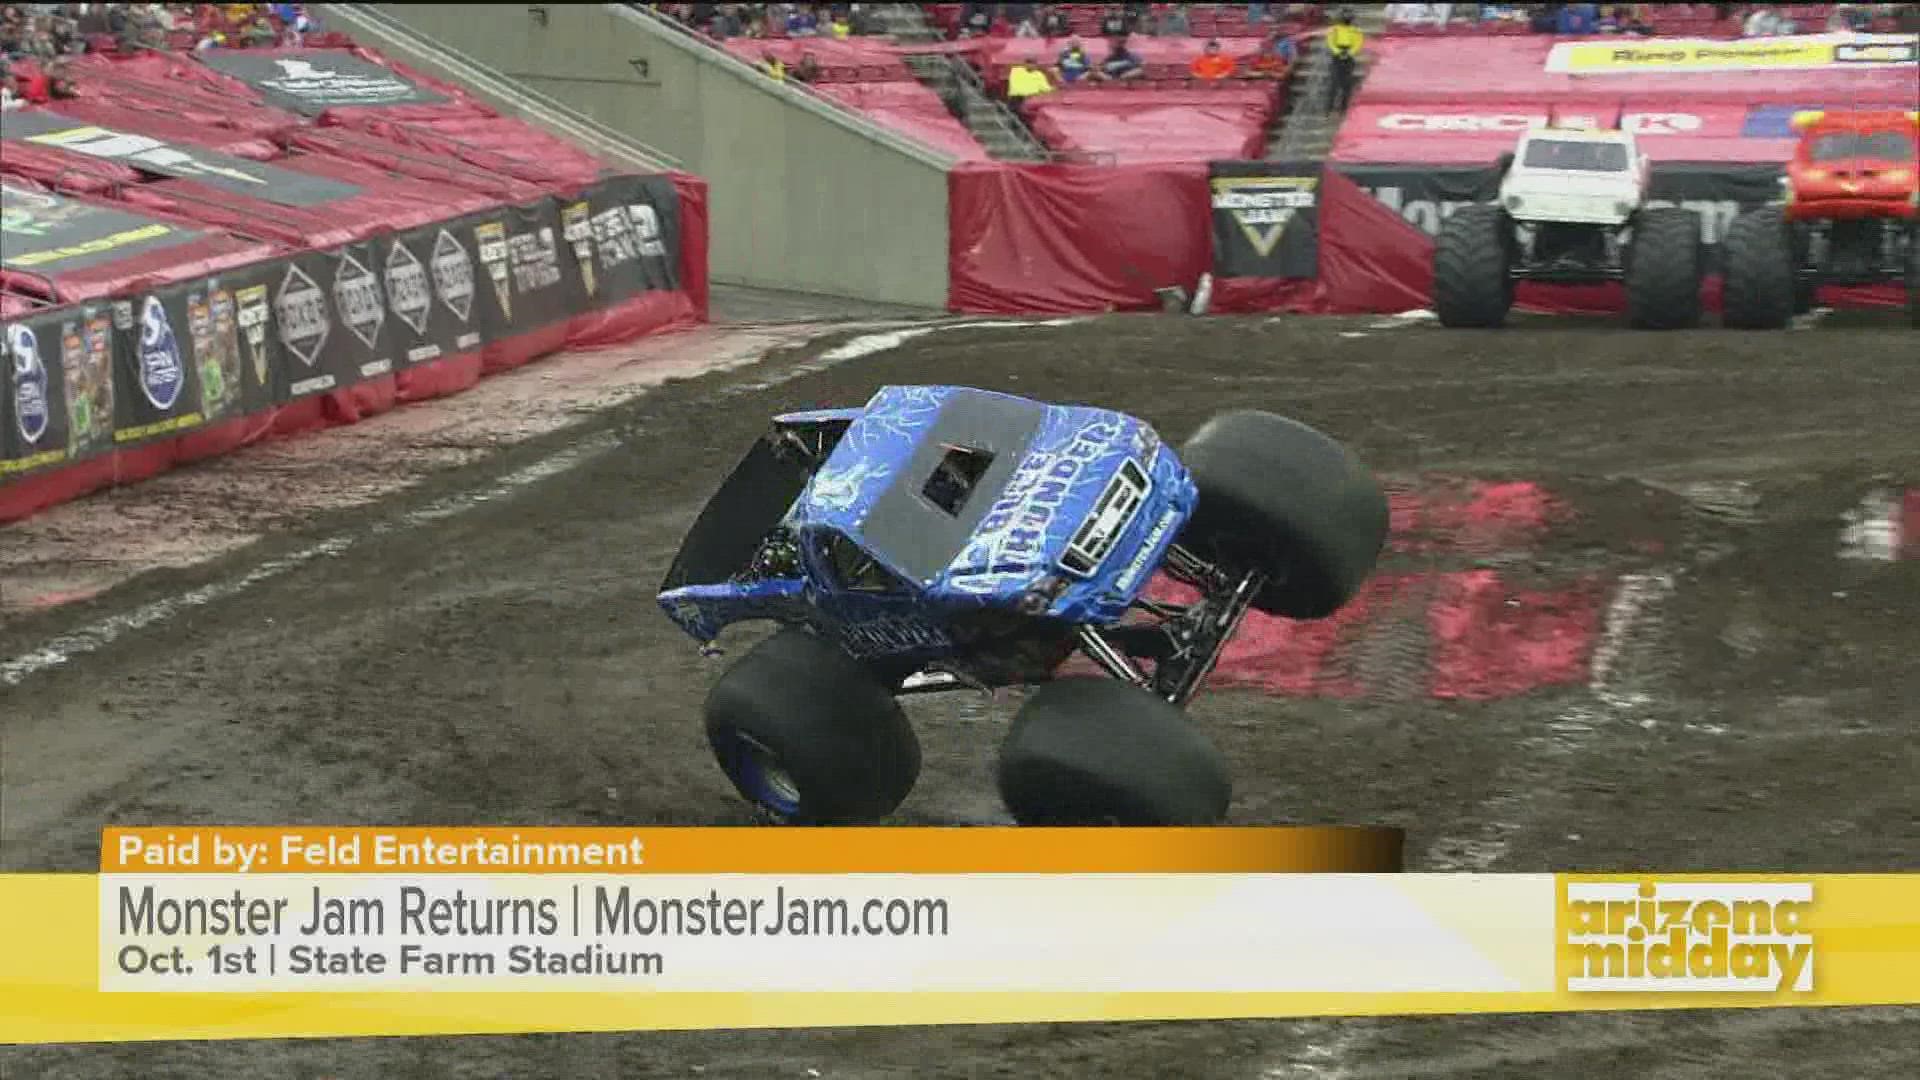 We talk with Todd LeDuc, driver of Blue Thunder, about the upcoming Monster Jam event & what fans can expect